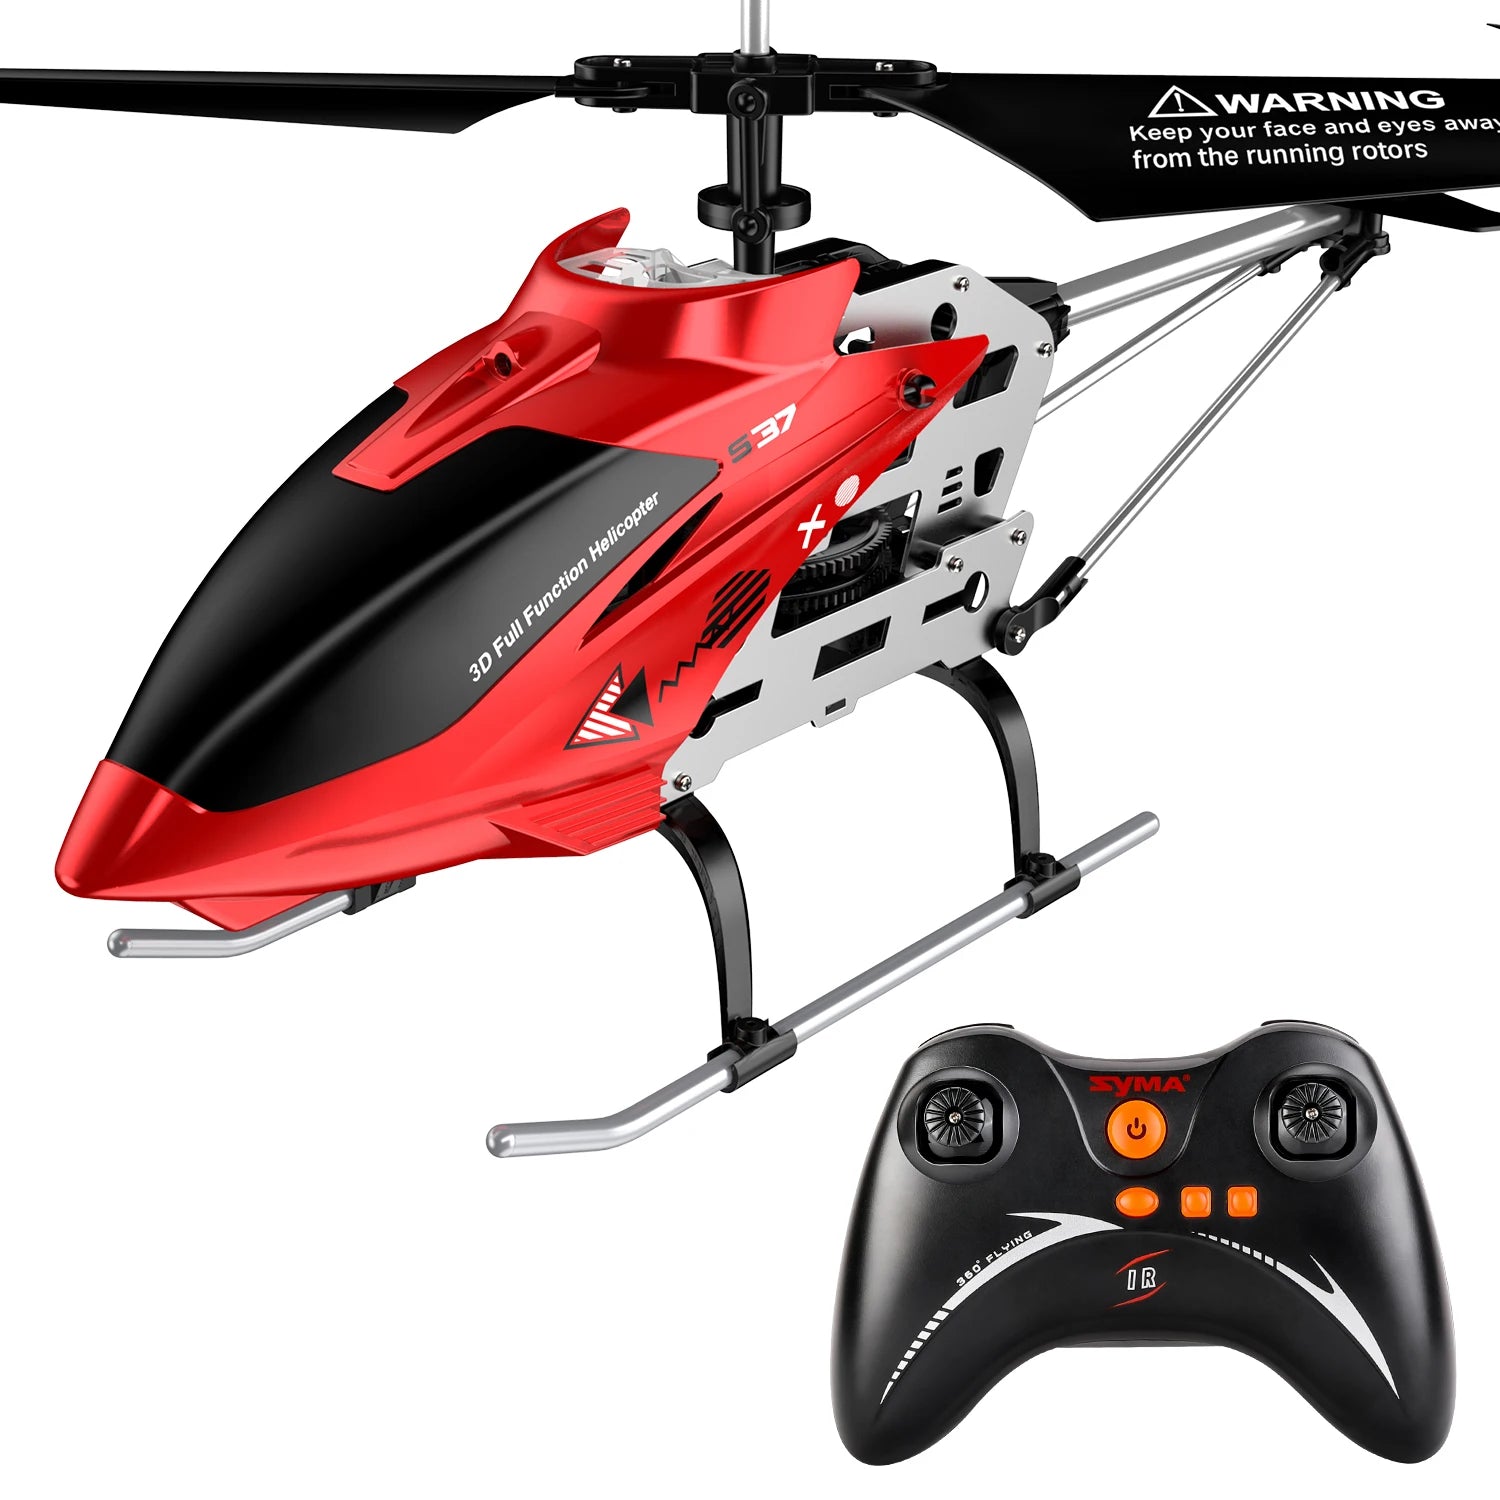 SYMA RC Helicopter, keep your face and eyes awa_ from the running rotors 30 SYMMA